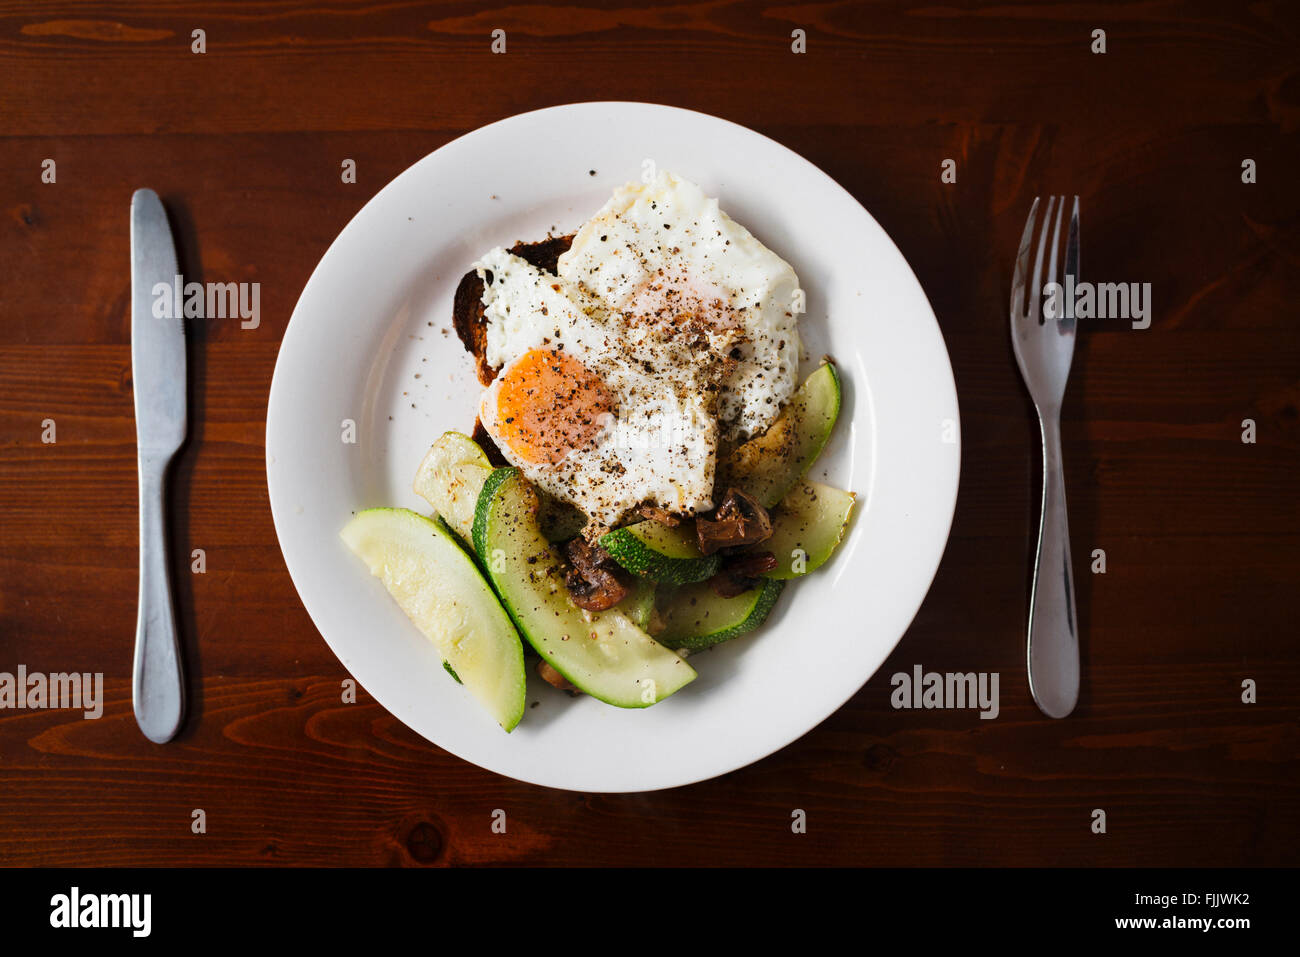 Healthy breakfast, eggs and courgette Stock Photo